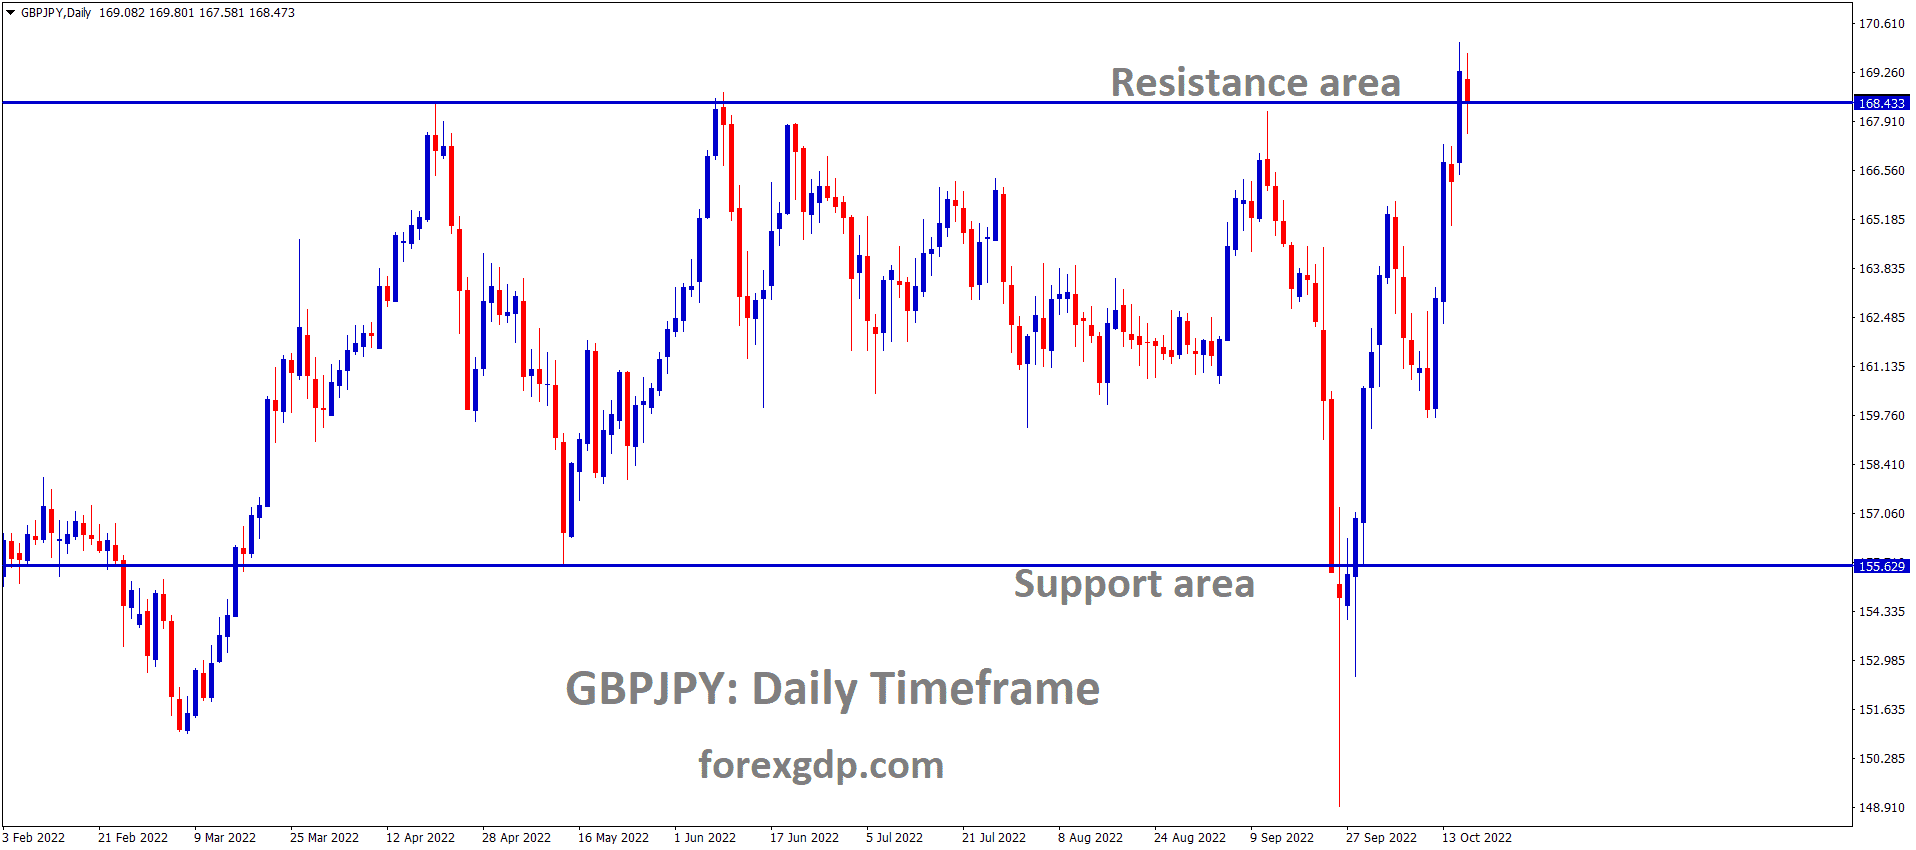 GBPJPY is moving in the Box pattern and the market has reached the resistance area of the pattern 1